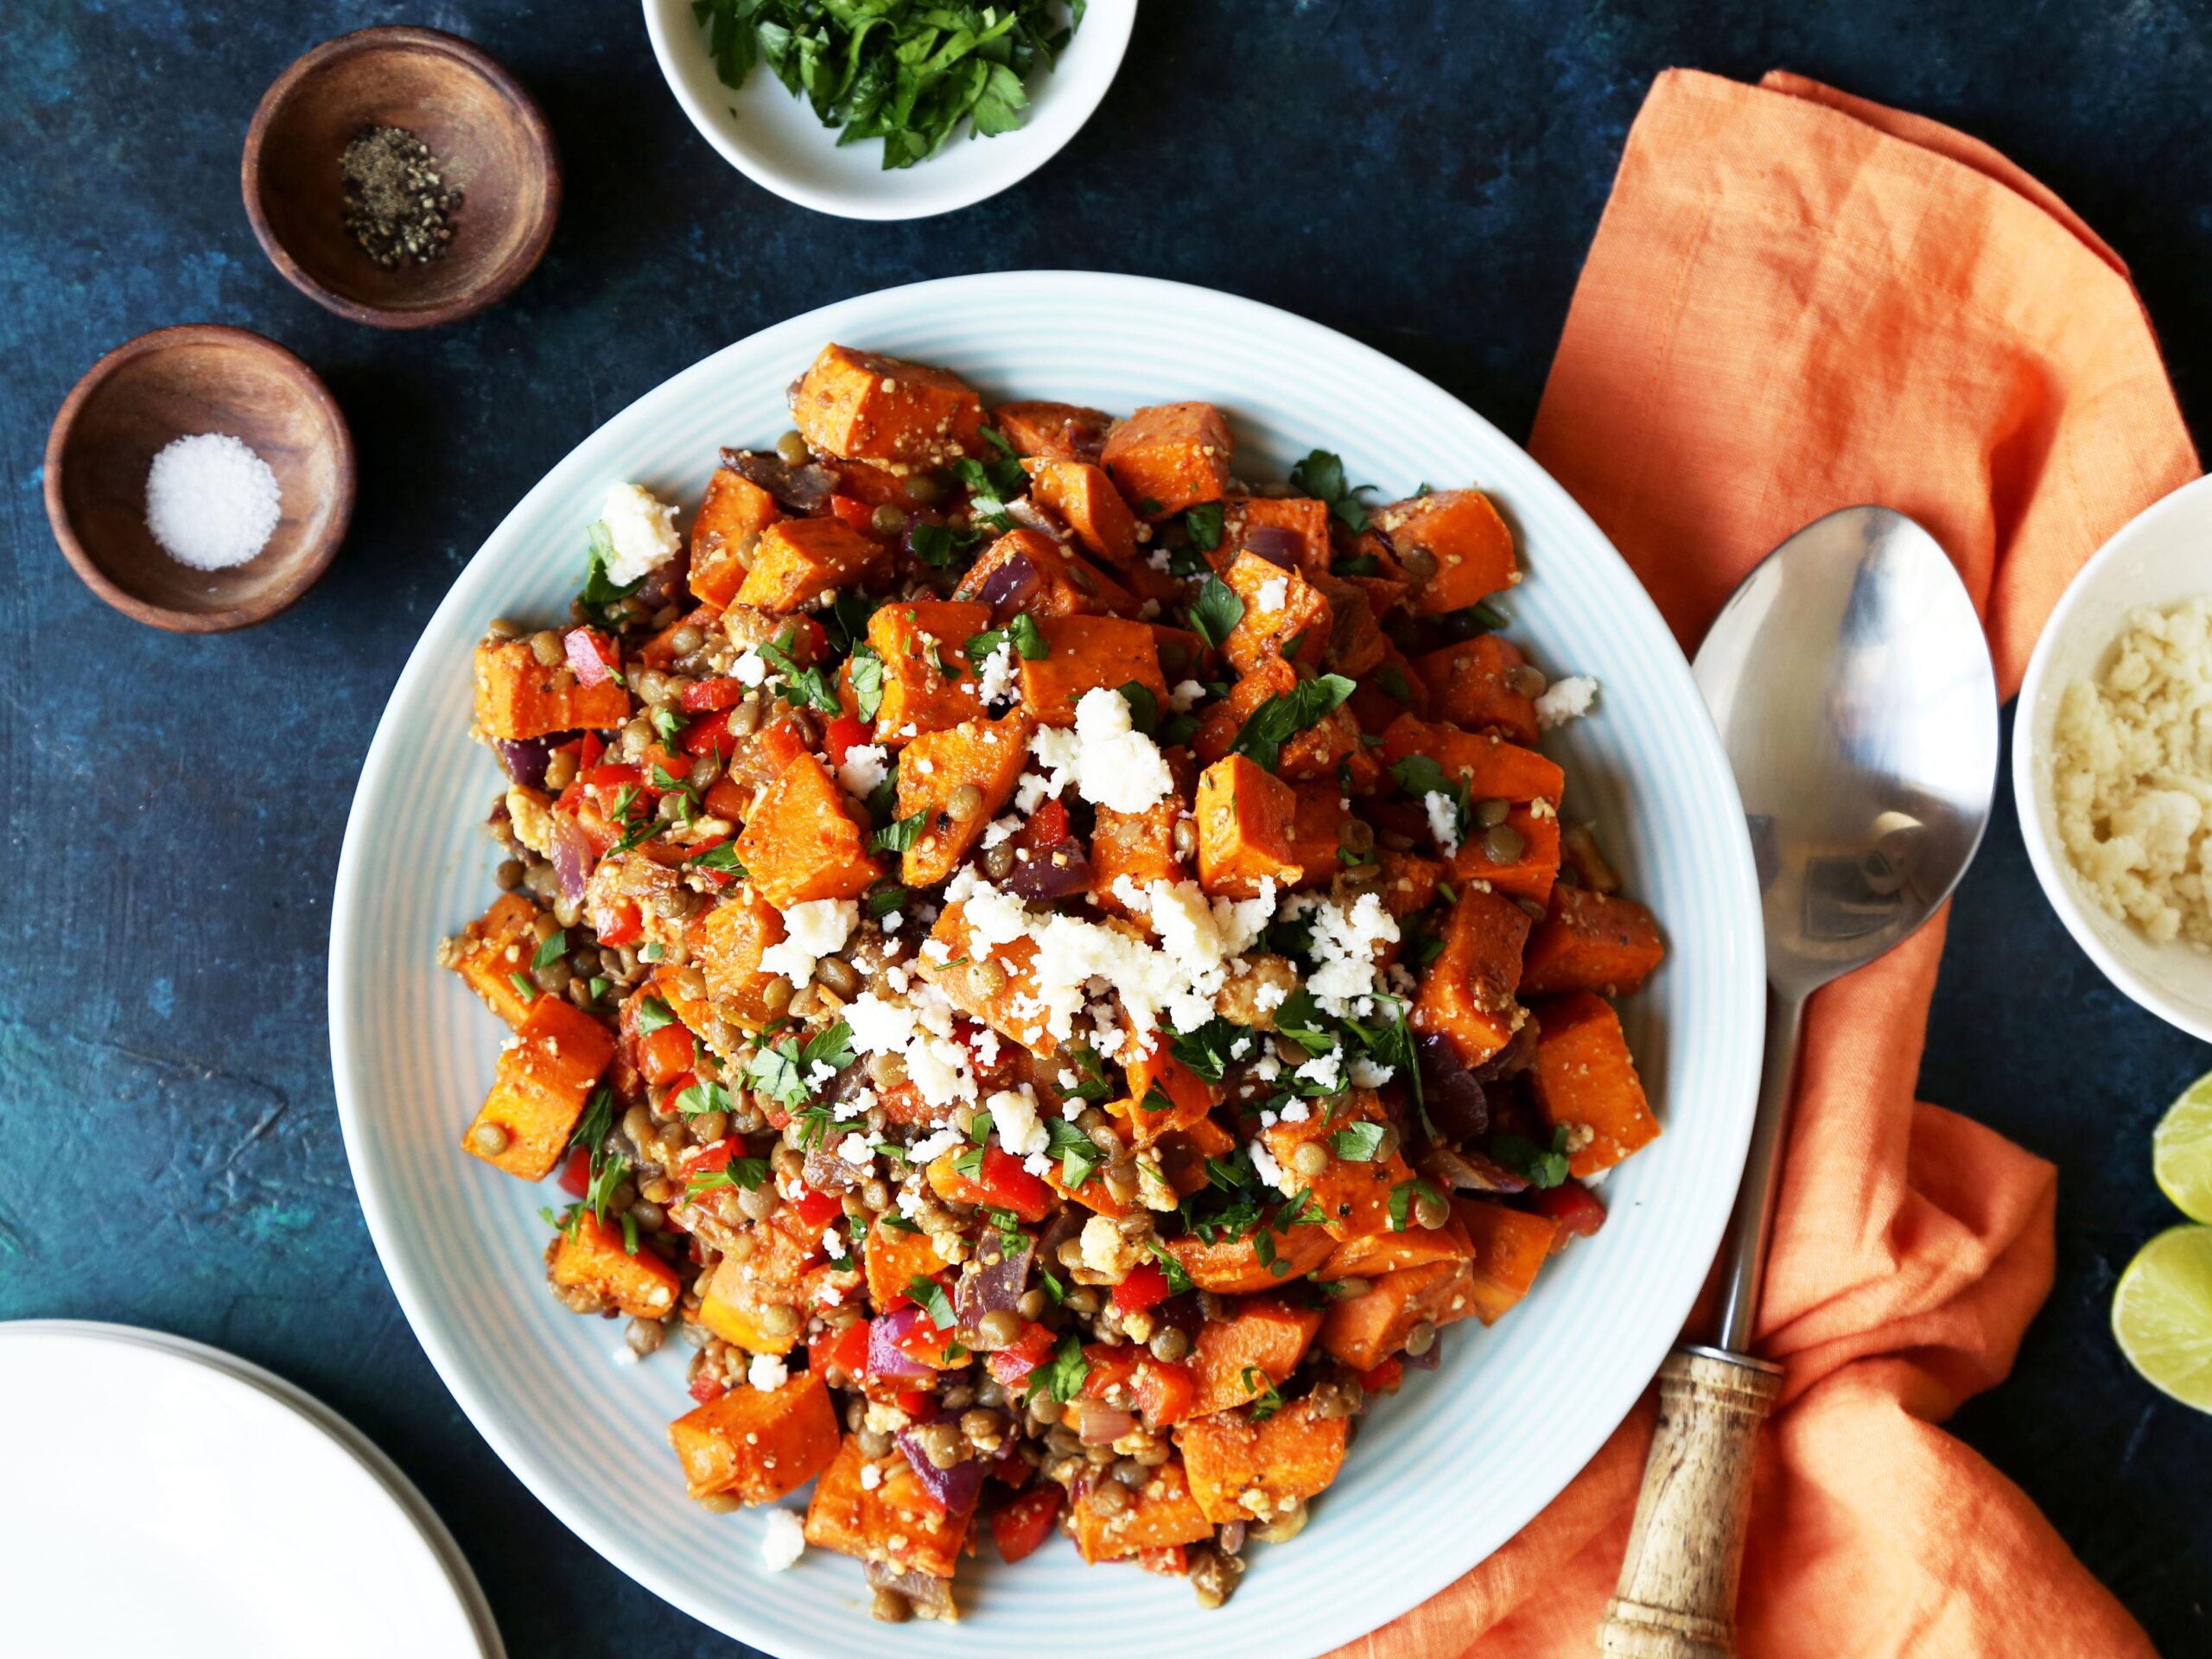  Roasted sweet potatoes add a delicious touch of sweetness to the savory lentils